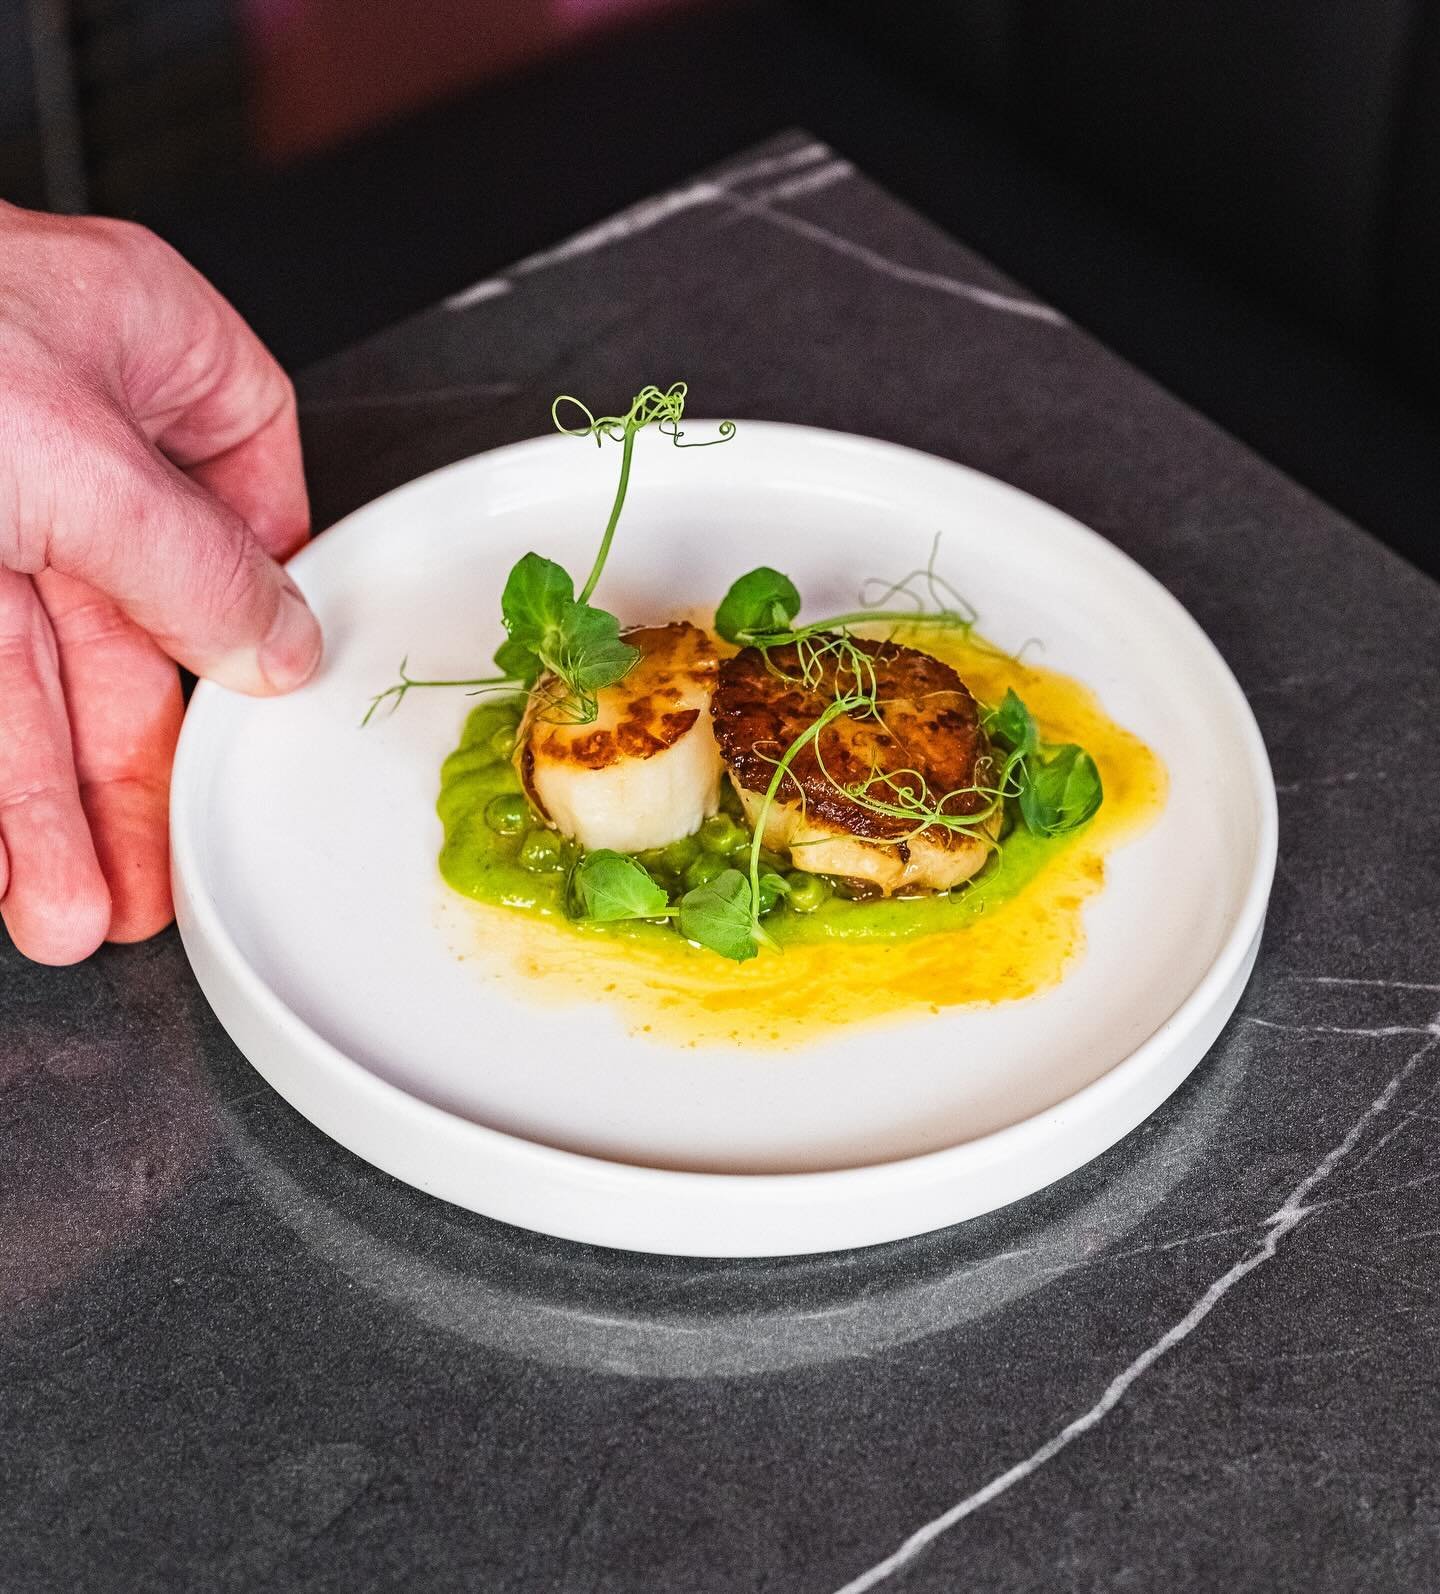 Scallops elevated with a vibrant pea pur&eacute;e and lemon butter &ndash; a symphony of flavors and colors on the plate! 🌿✨ 

Dive into this delightful dish that&rsquo;s as beautiful as it is delicious. 

Photo: @cameronmhillphotography 📸
#d&eacut